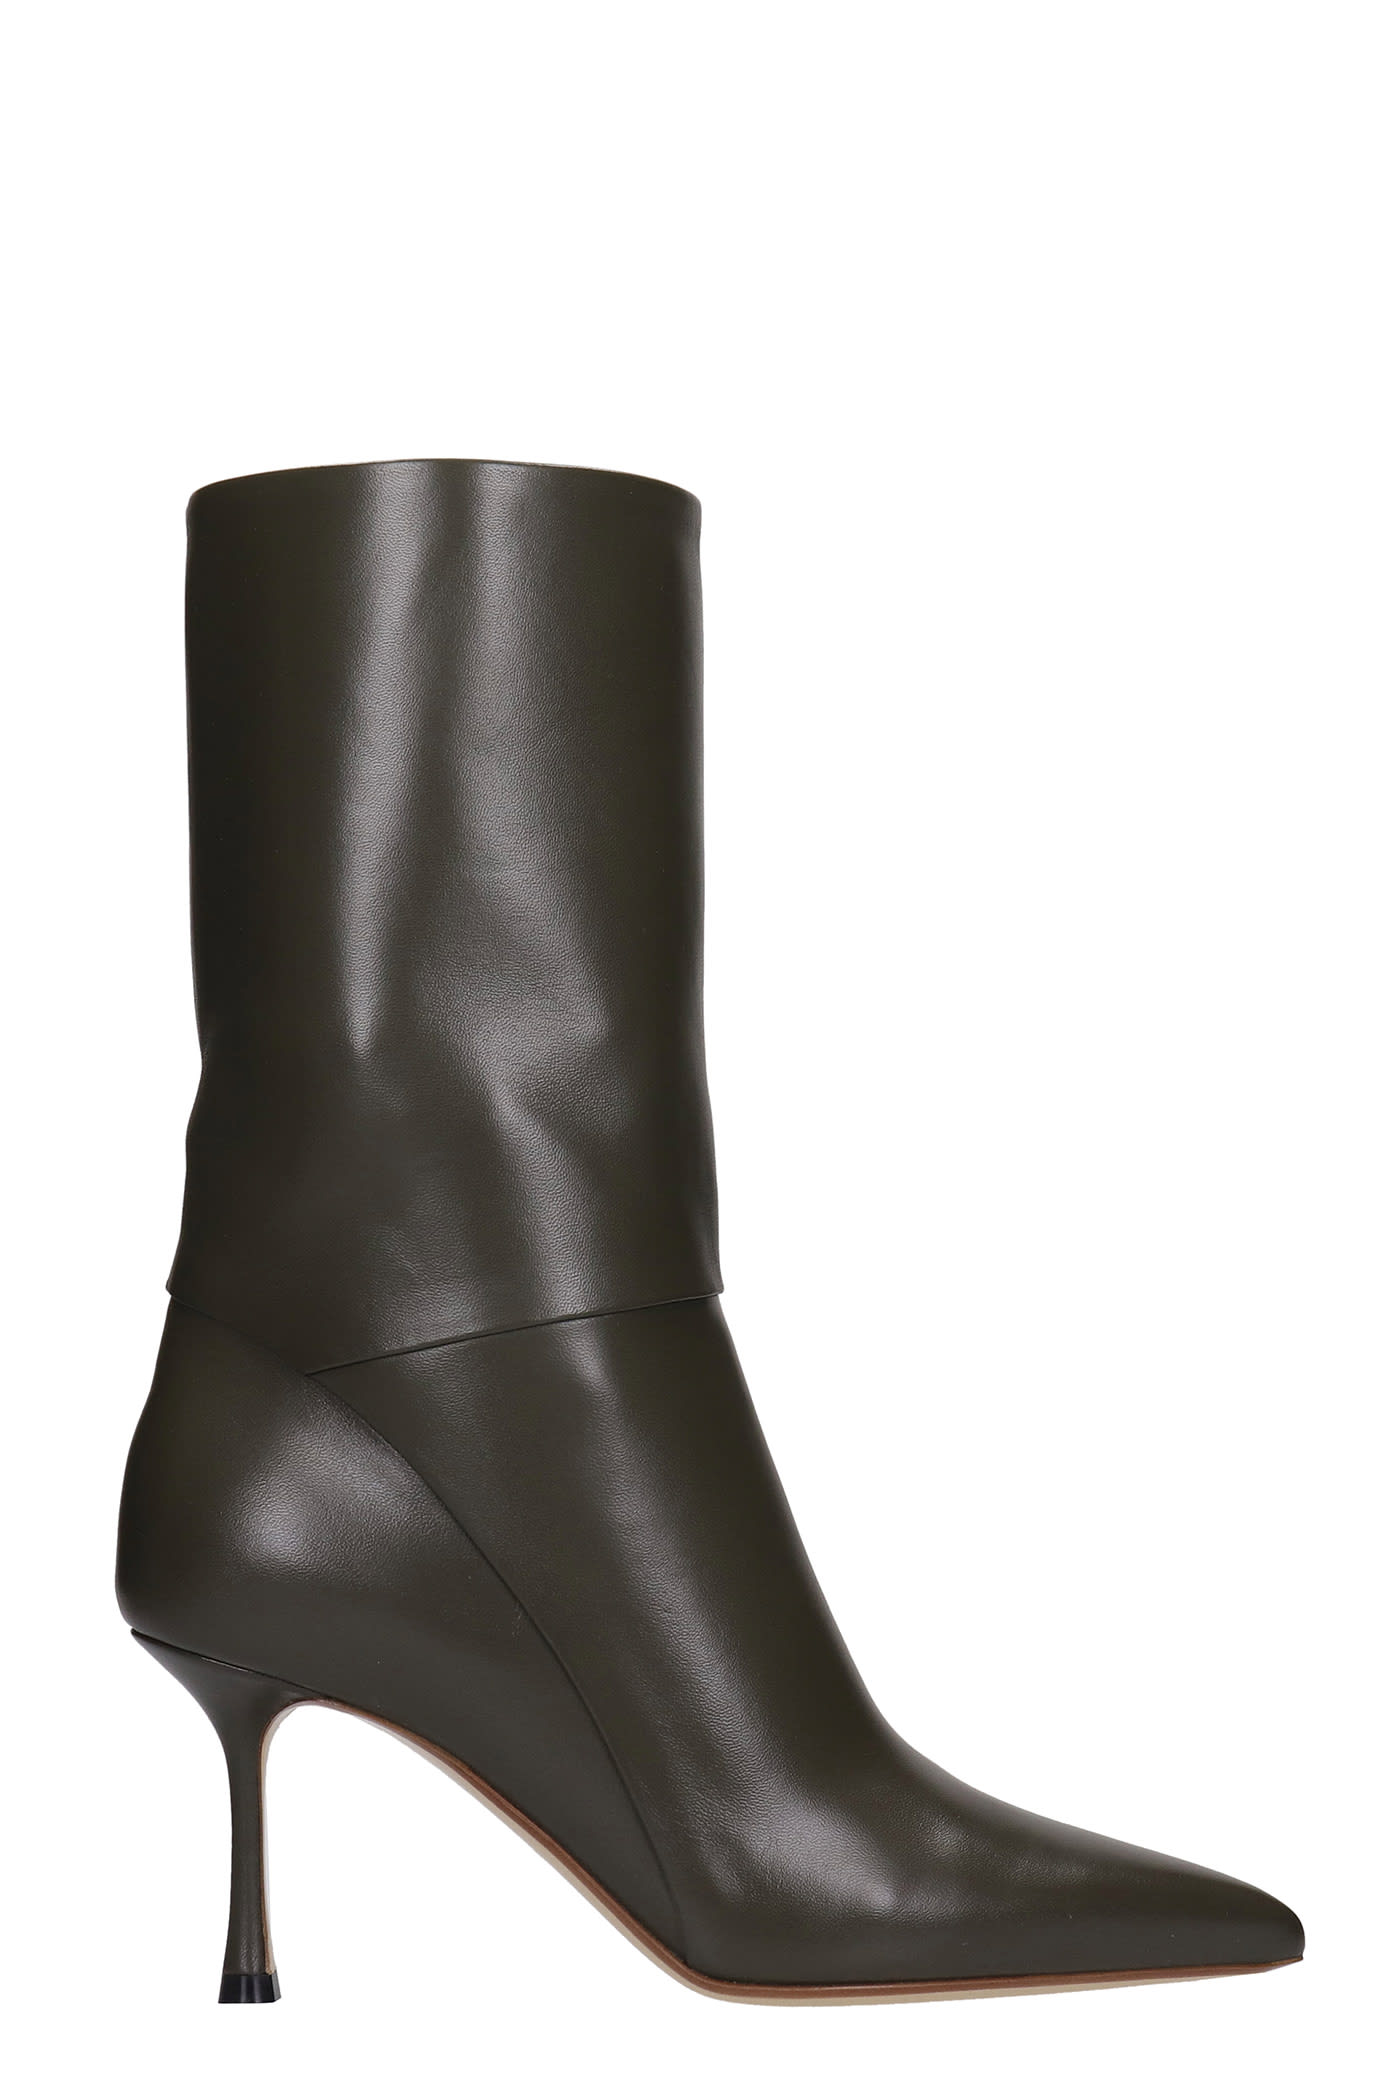 Francesco Russo High Heels Ankle Boots In Green Leather